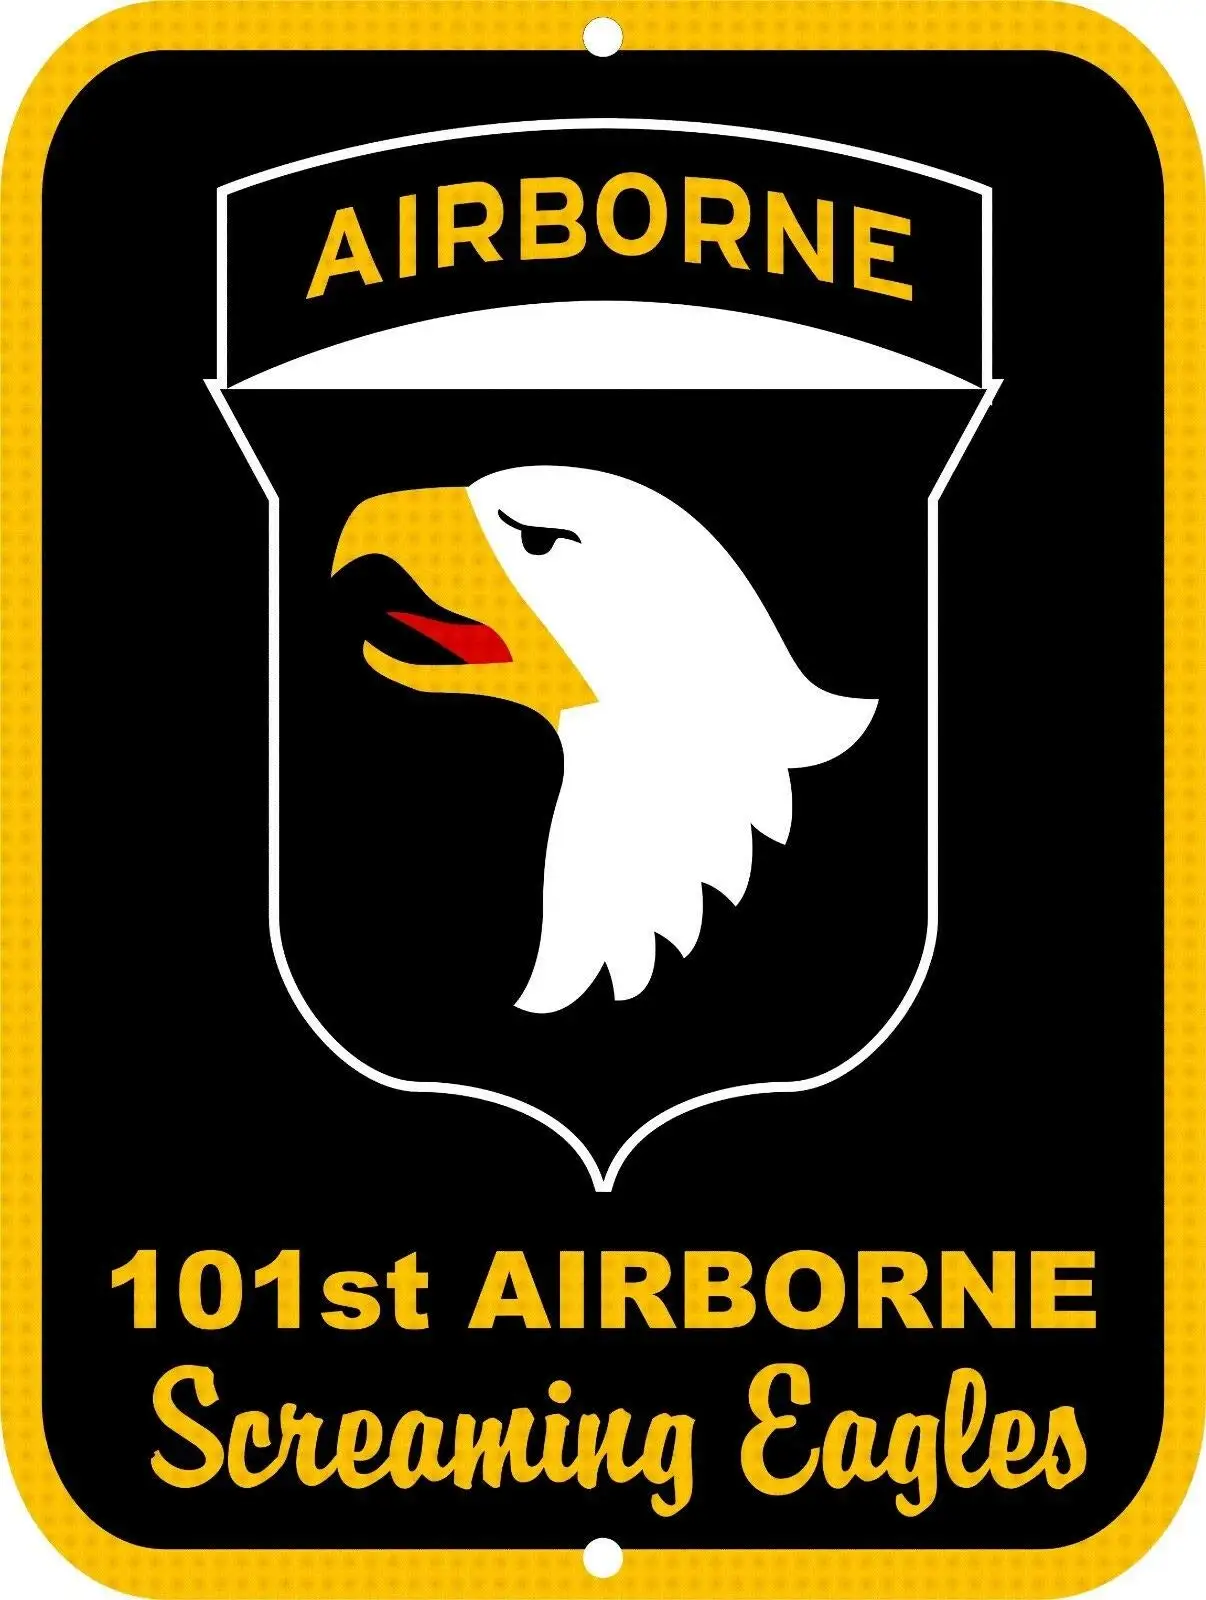 

New Tin Sign Army 101st Airborne Division Screaming Eagles Vietnam Iraq Metal Tin Sign Vintage Art Mural 8x12 Inch